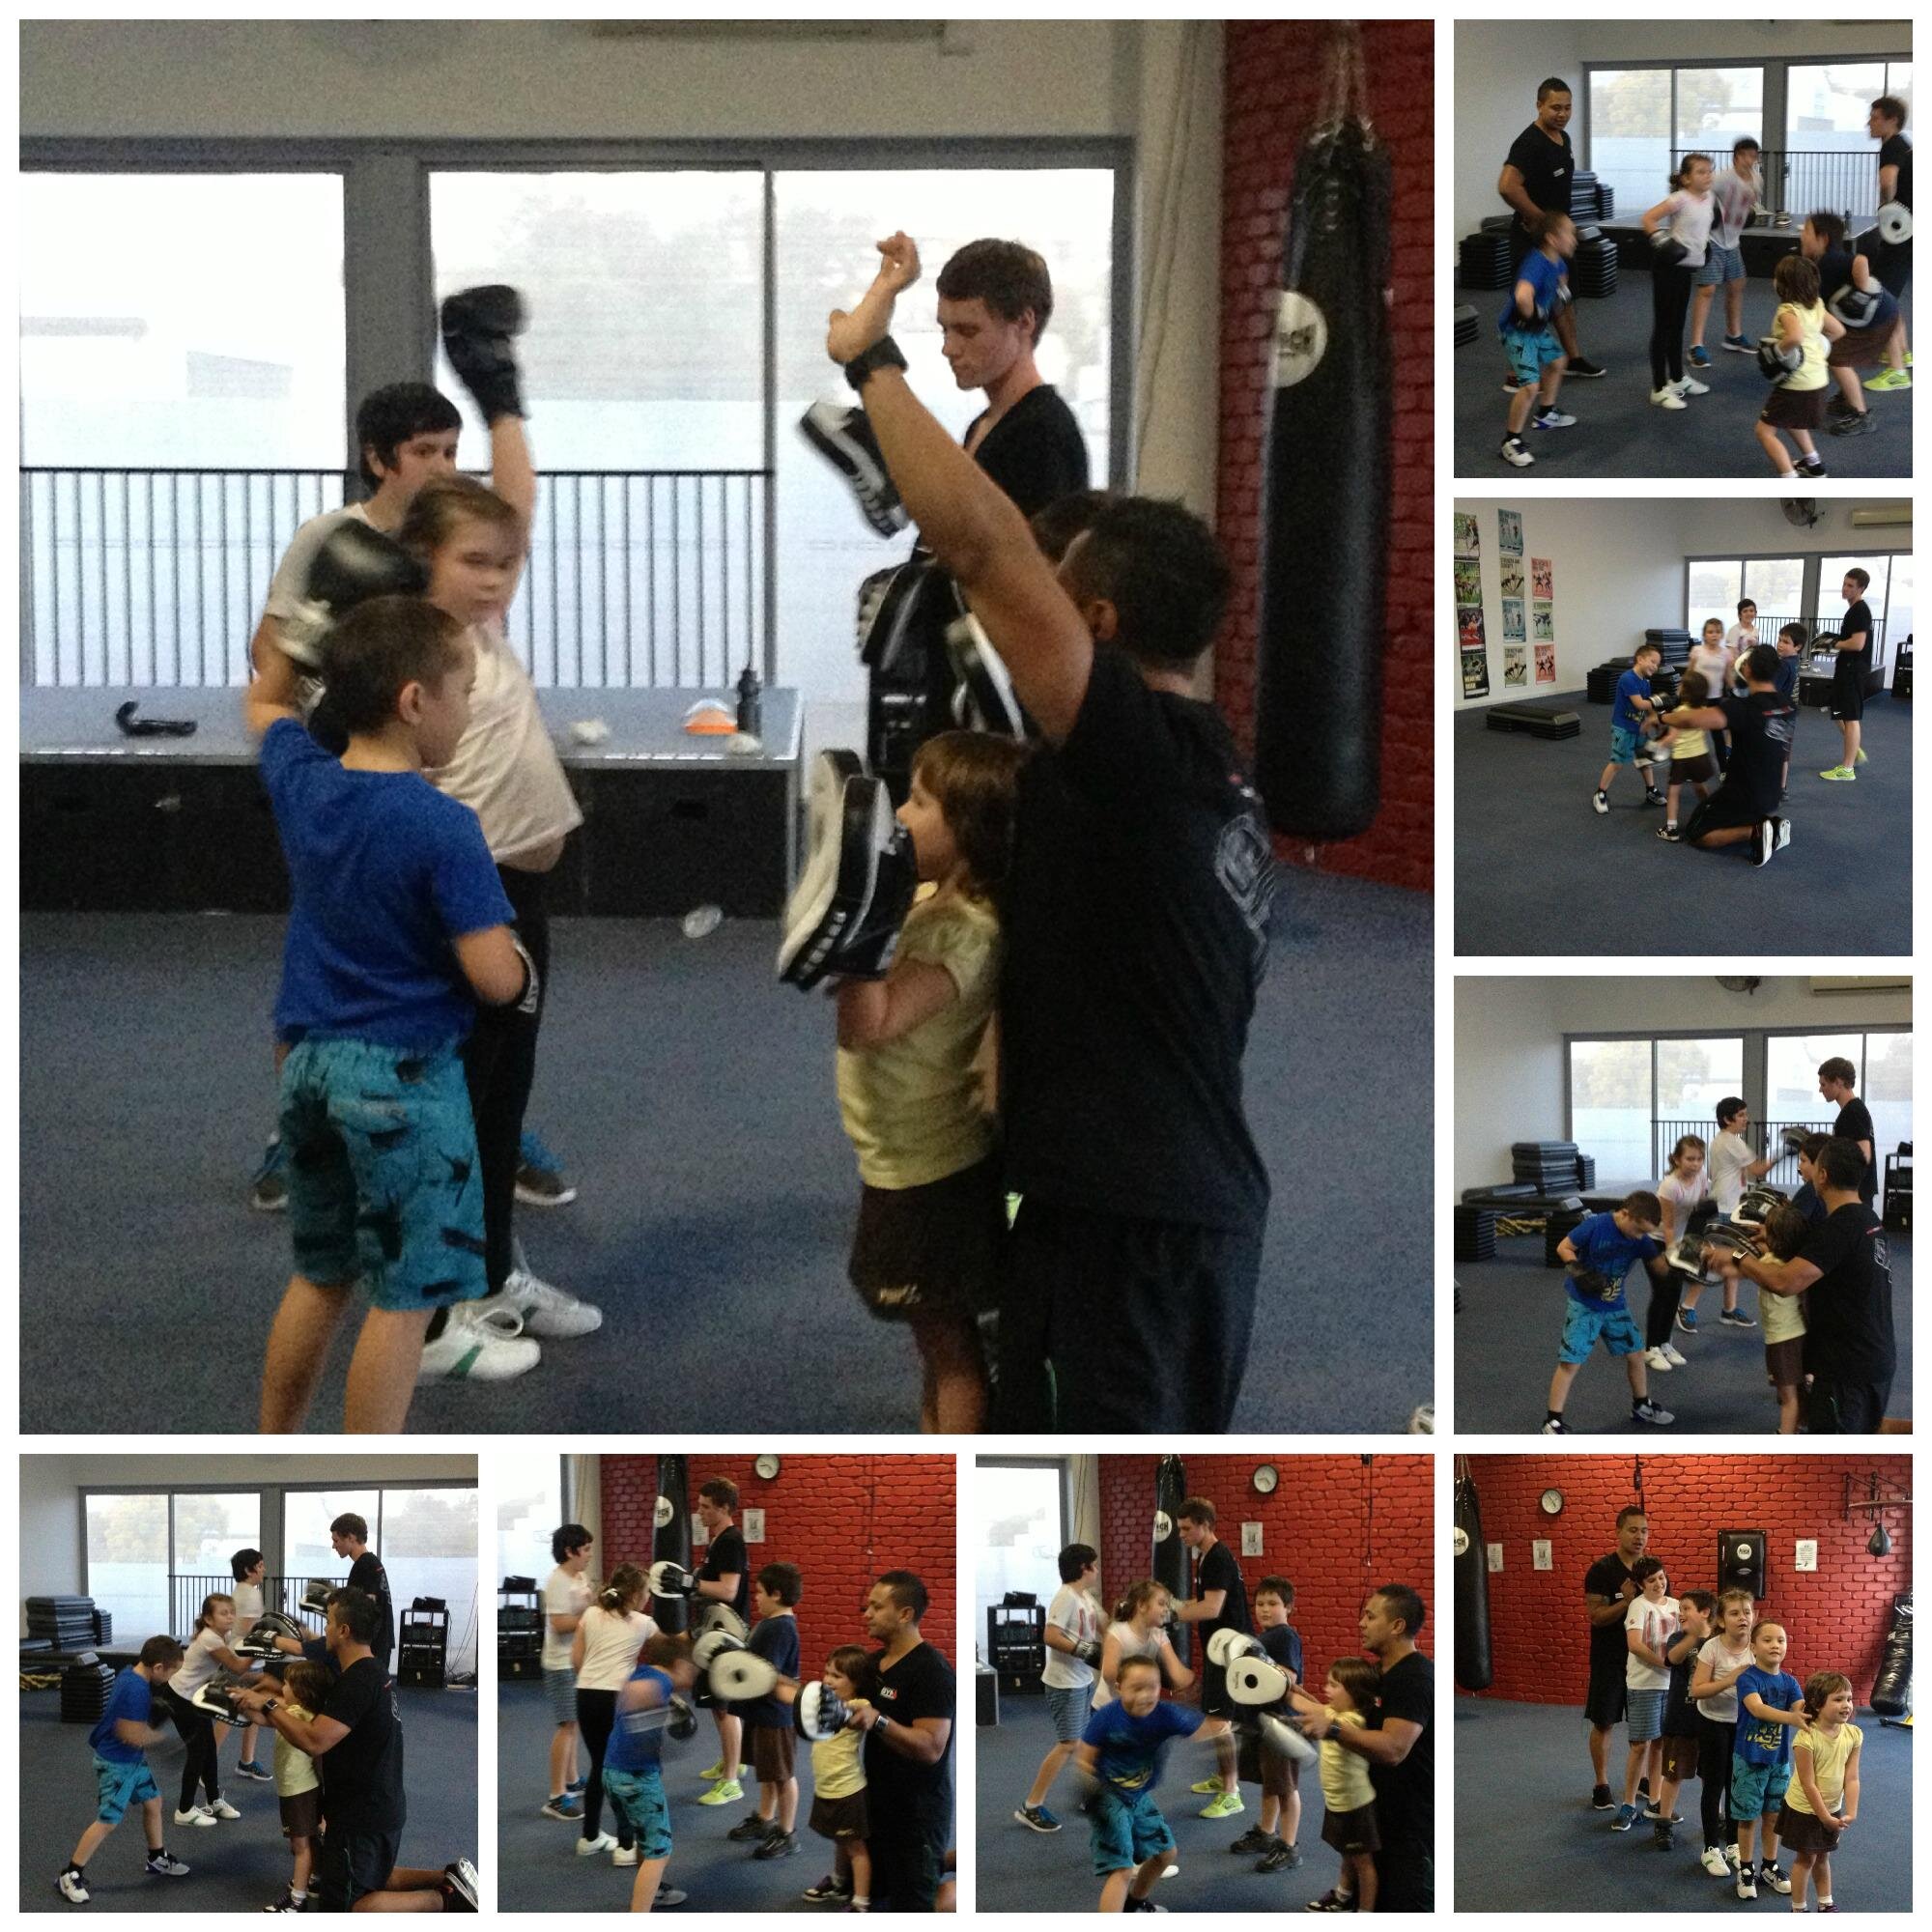 🥊THROWBACK THURSDAY🥊

Check out our first KIDS Boxing Group Fitness Class back in 2013. 🤪🤯

If you have a look through these photos you might just see our very own 11yr old Thomas😍🤣!!! This was the first time he ever did boxing and has done it 